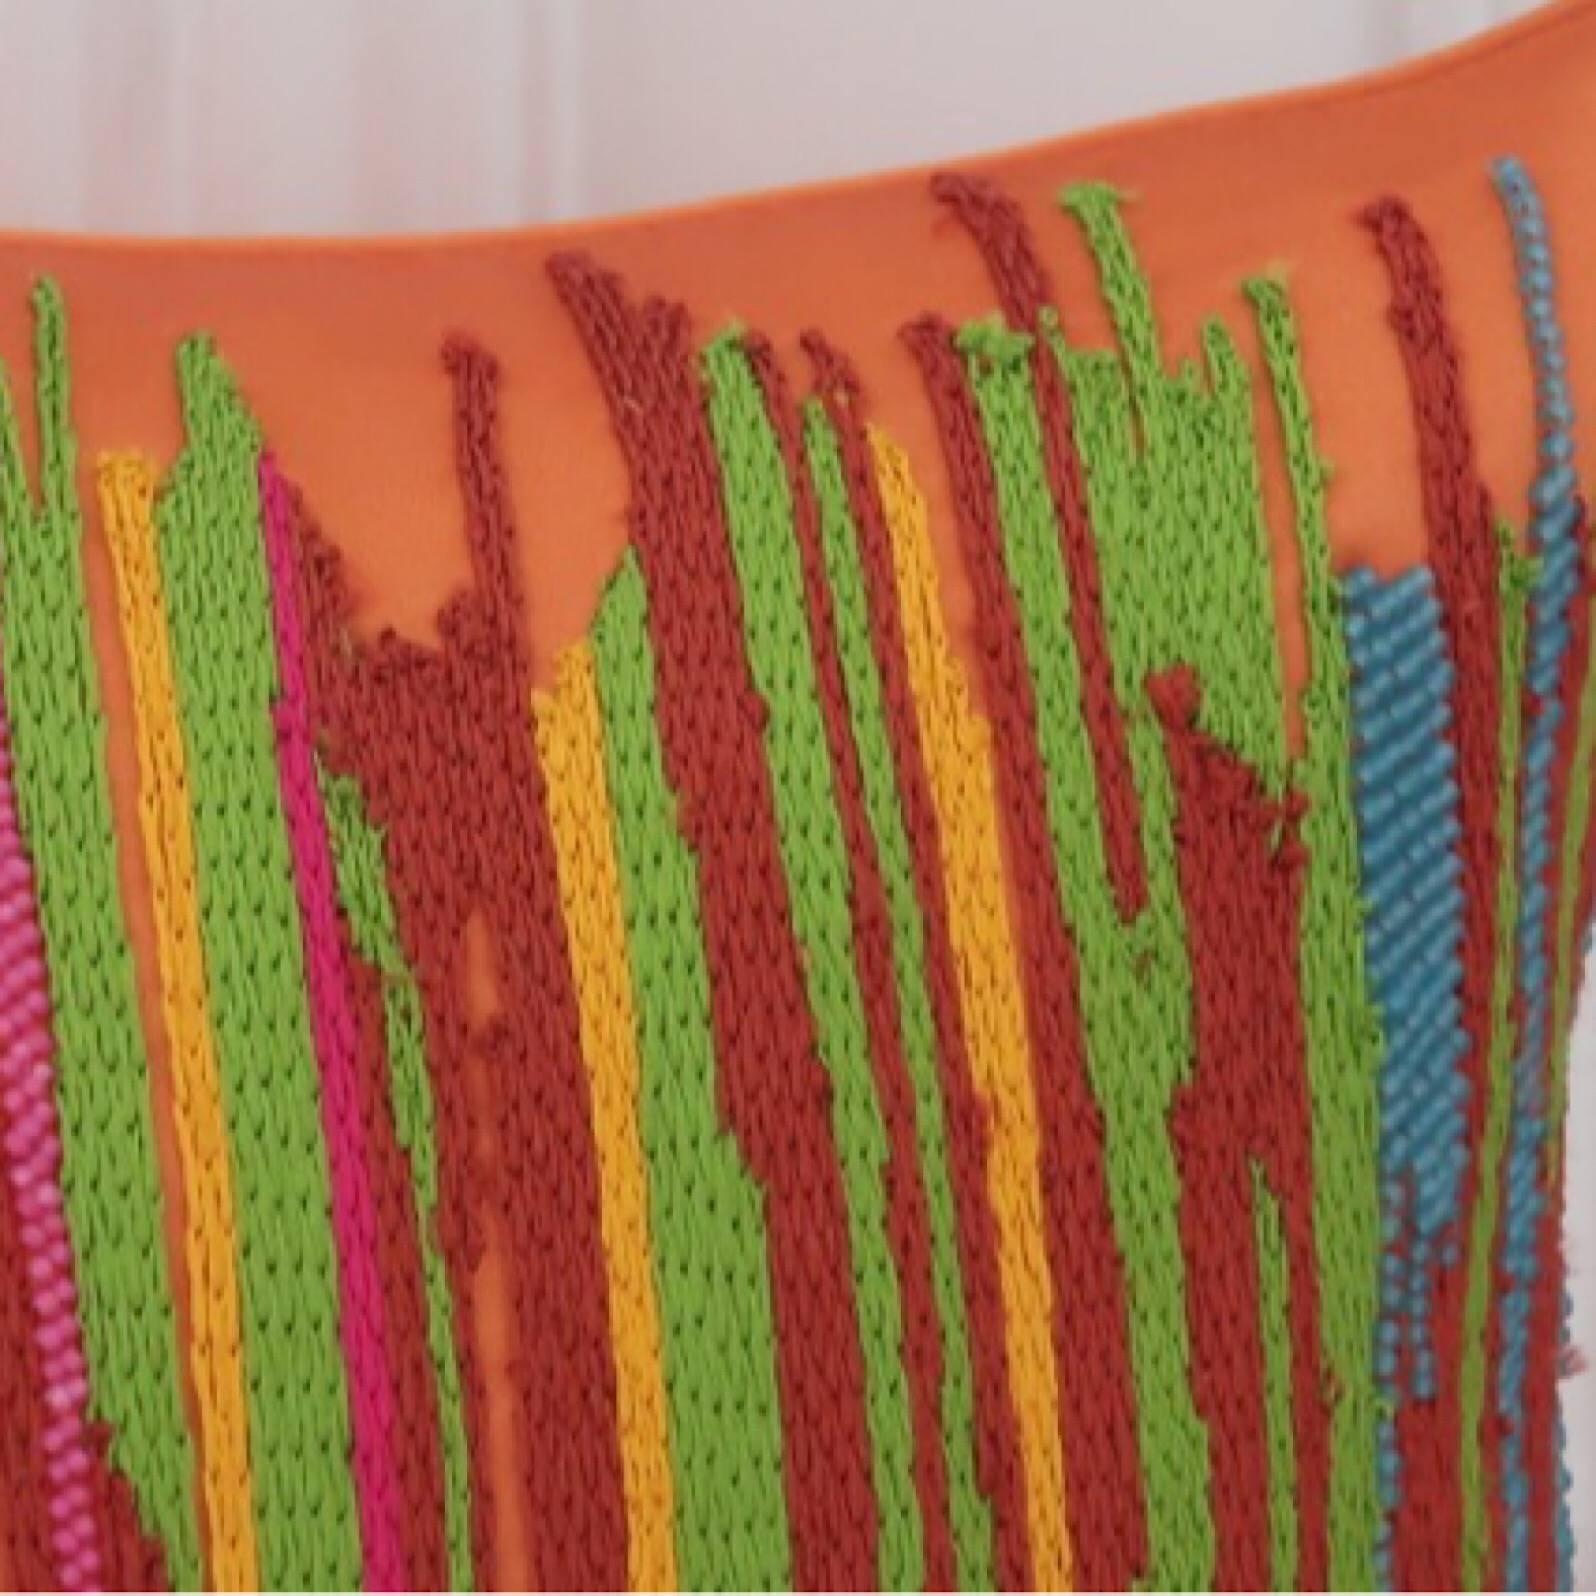 Hand embroidered pillow.
Handcrafted using Matt beads and cotton yarn embroidered in brightly colored stripes on a orange background.
Satin fabric, self zip and feather pads.